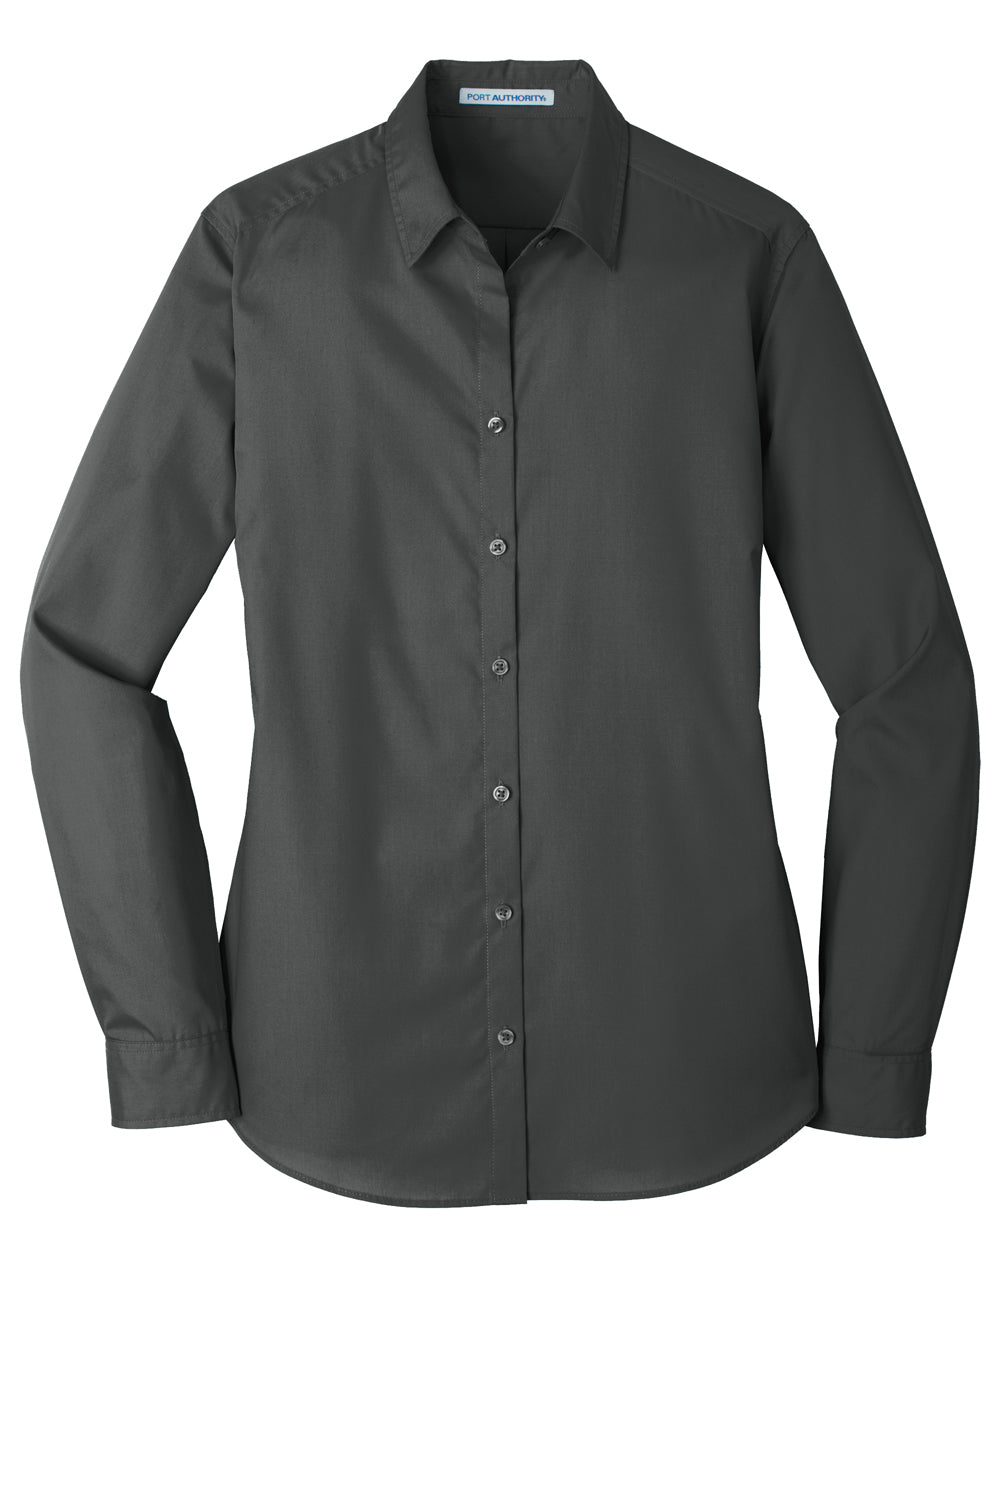 Port Authority LW100 Womens Carefree Stain Resistant Long Sleeve Button Down Shirt Graphite Grey Flat Front